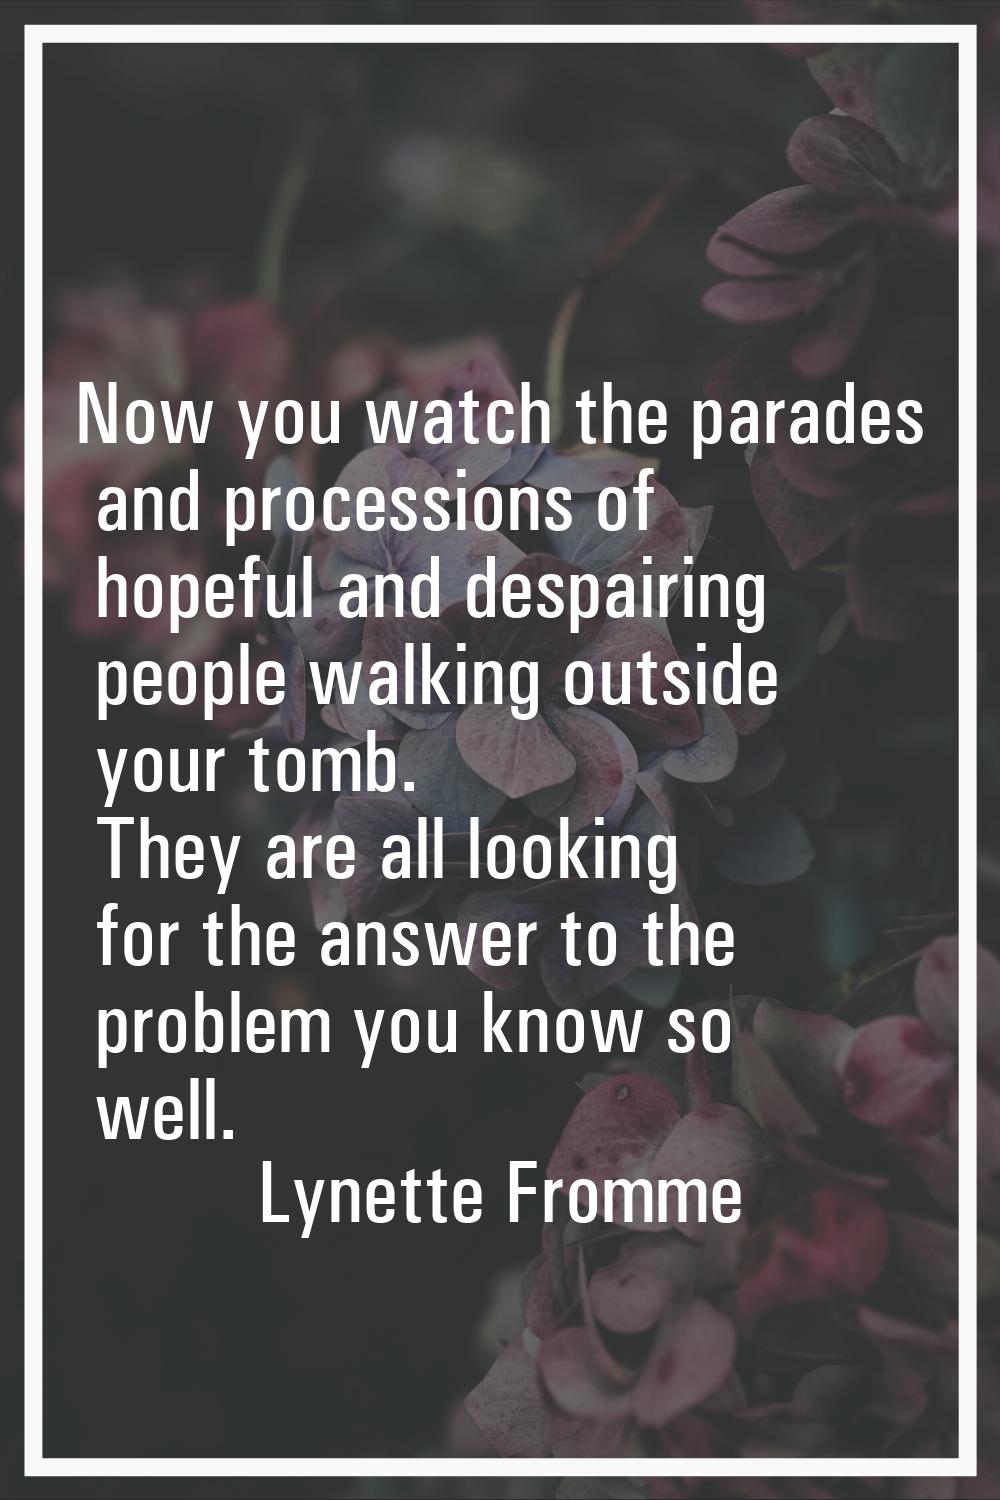 Now you watch the parades and processions of hopeful and despairing people walking outside your tom